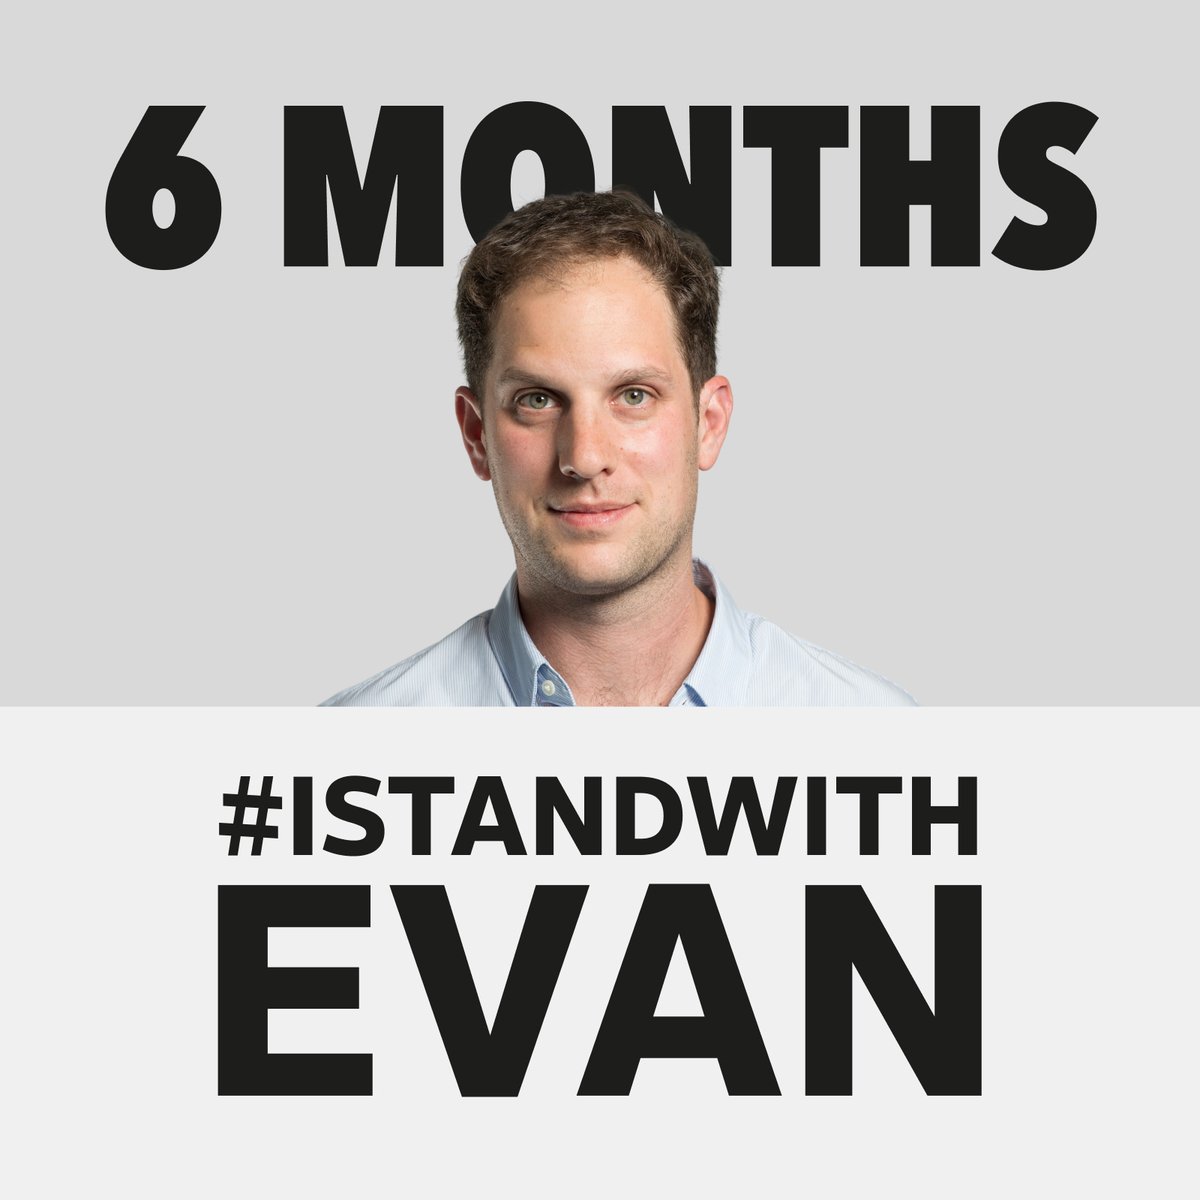 Journalists write the first draft of history and that's exactly what my colleague Evan Gershkovich was doing when he was falsely imprisoned by the Russian government. He should be back in the newsroom and out in the field doing what he loved most. Bring him home #FreeEvan